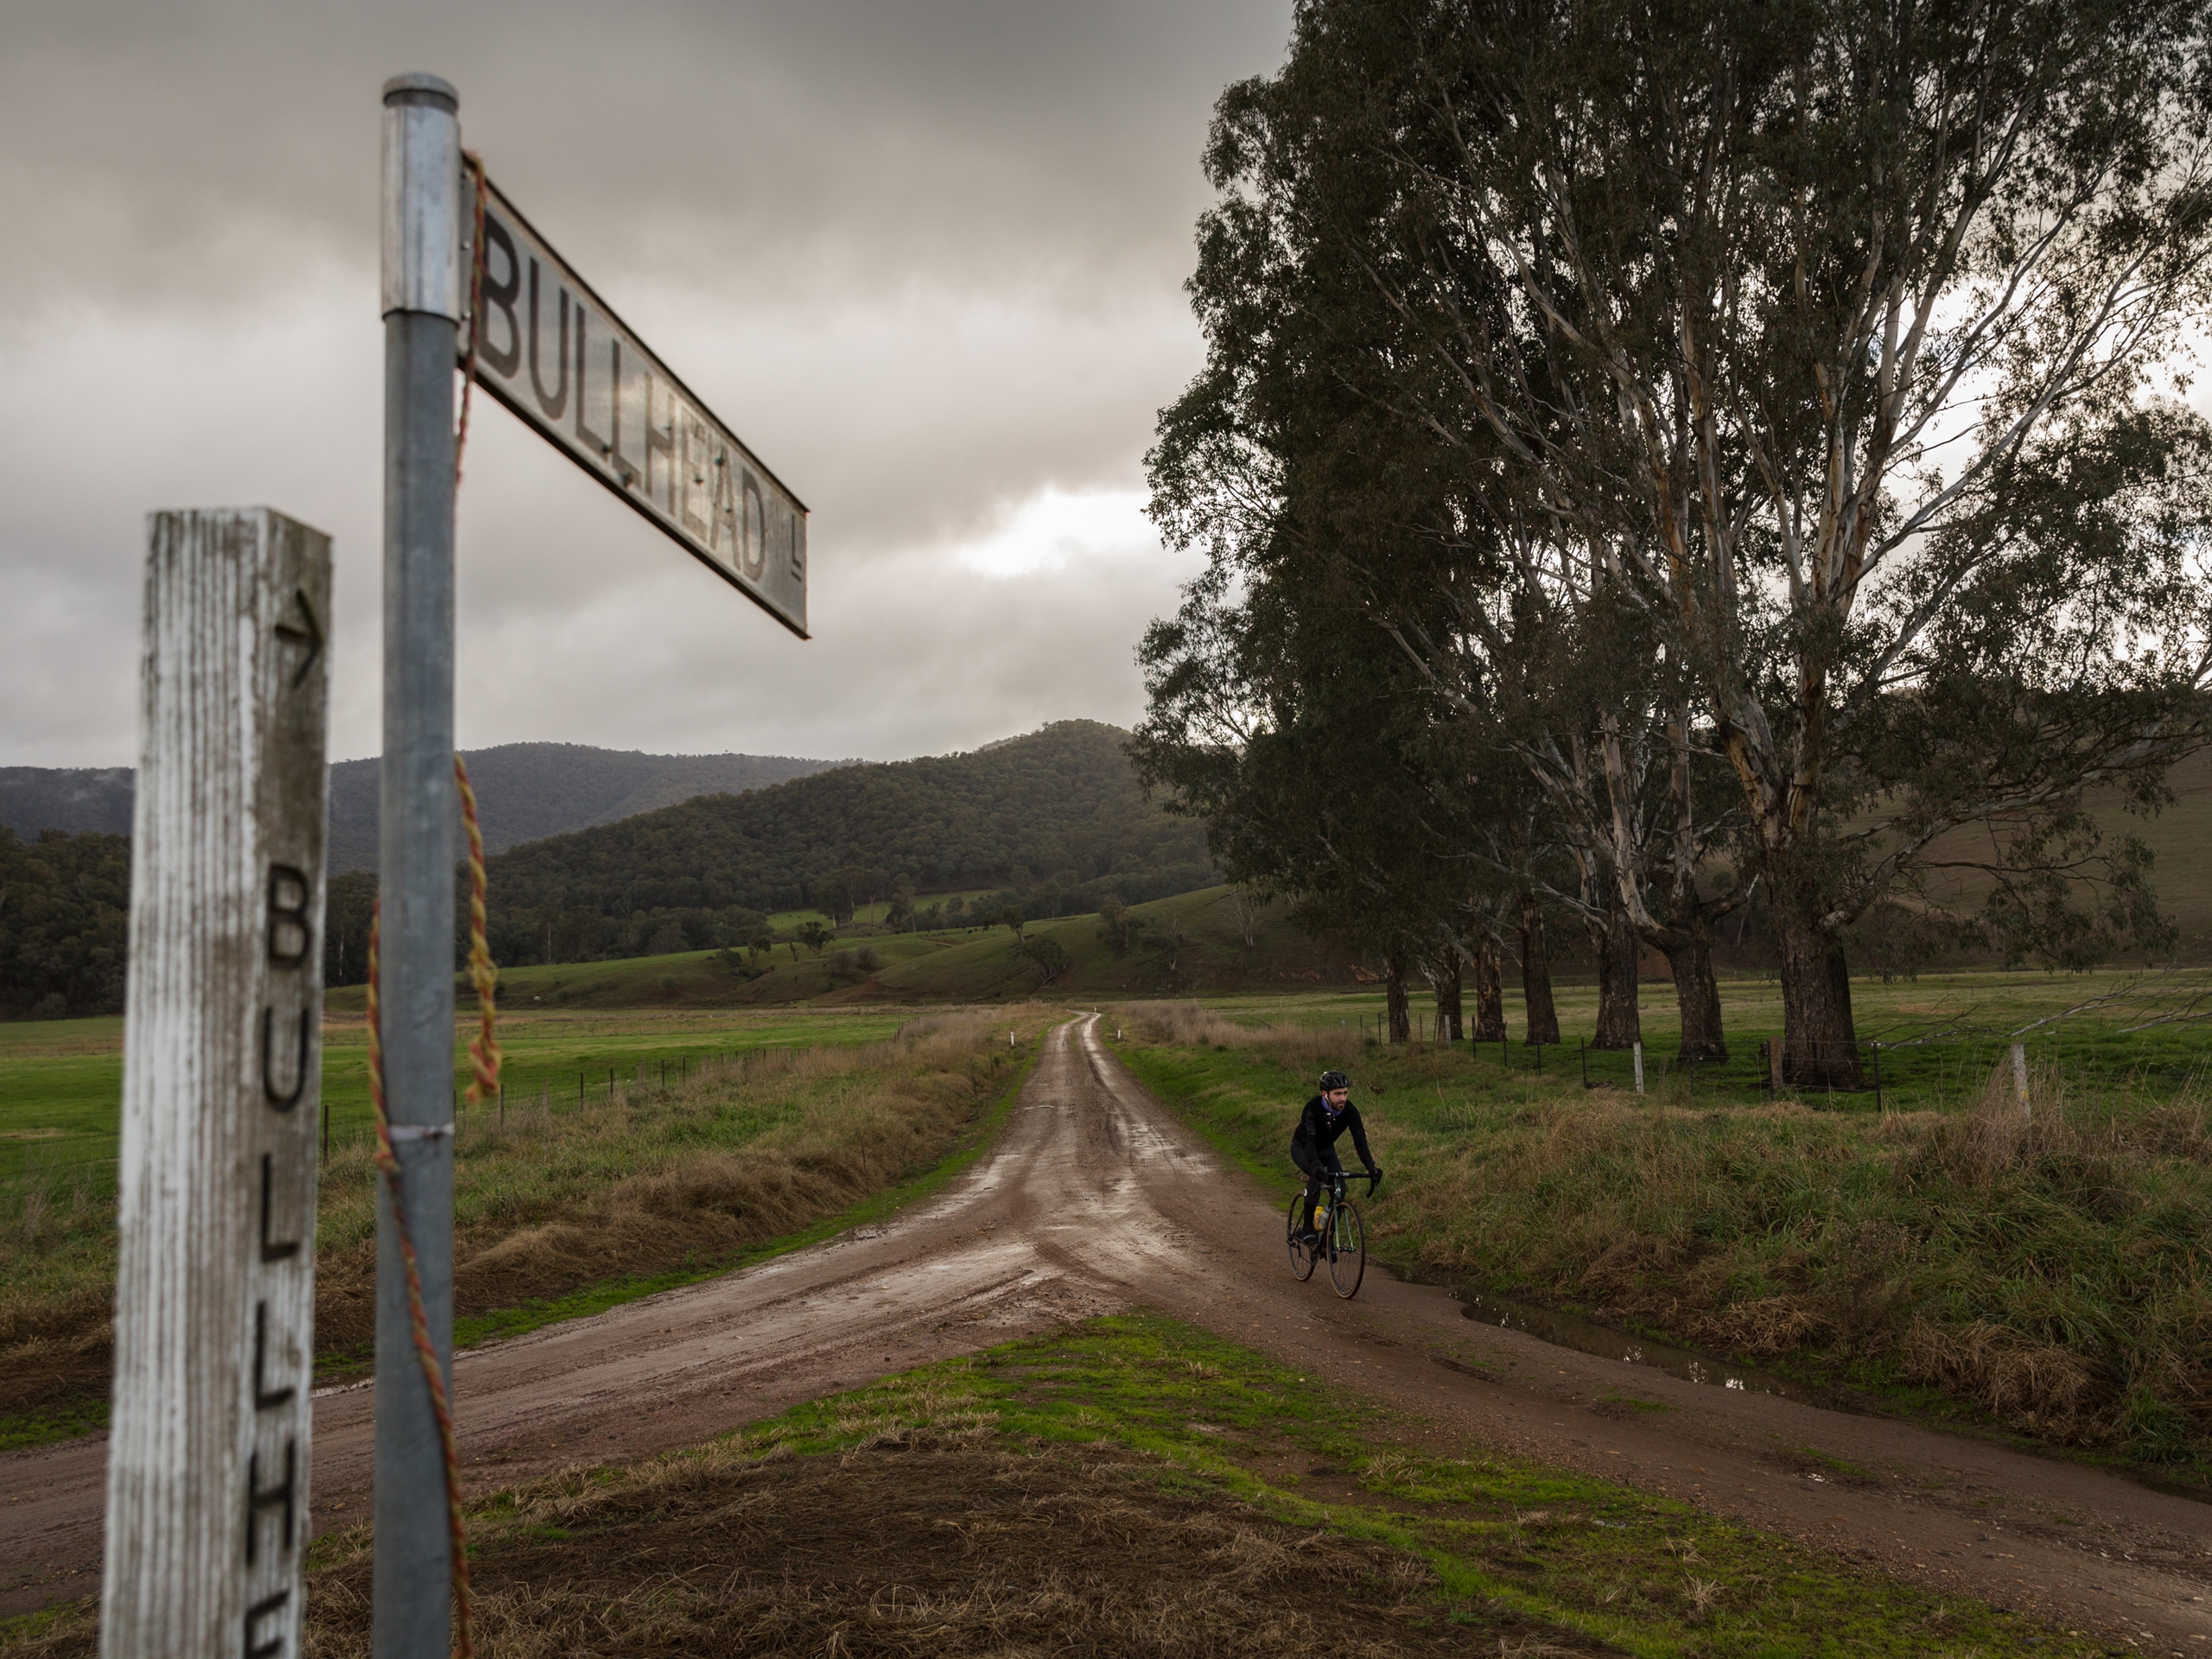 Riding on gravel roads in the Mitta Valley with gloomy skies overhead